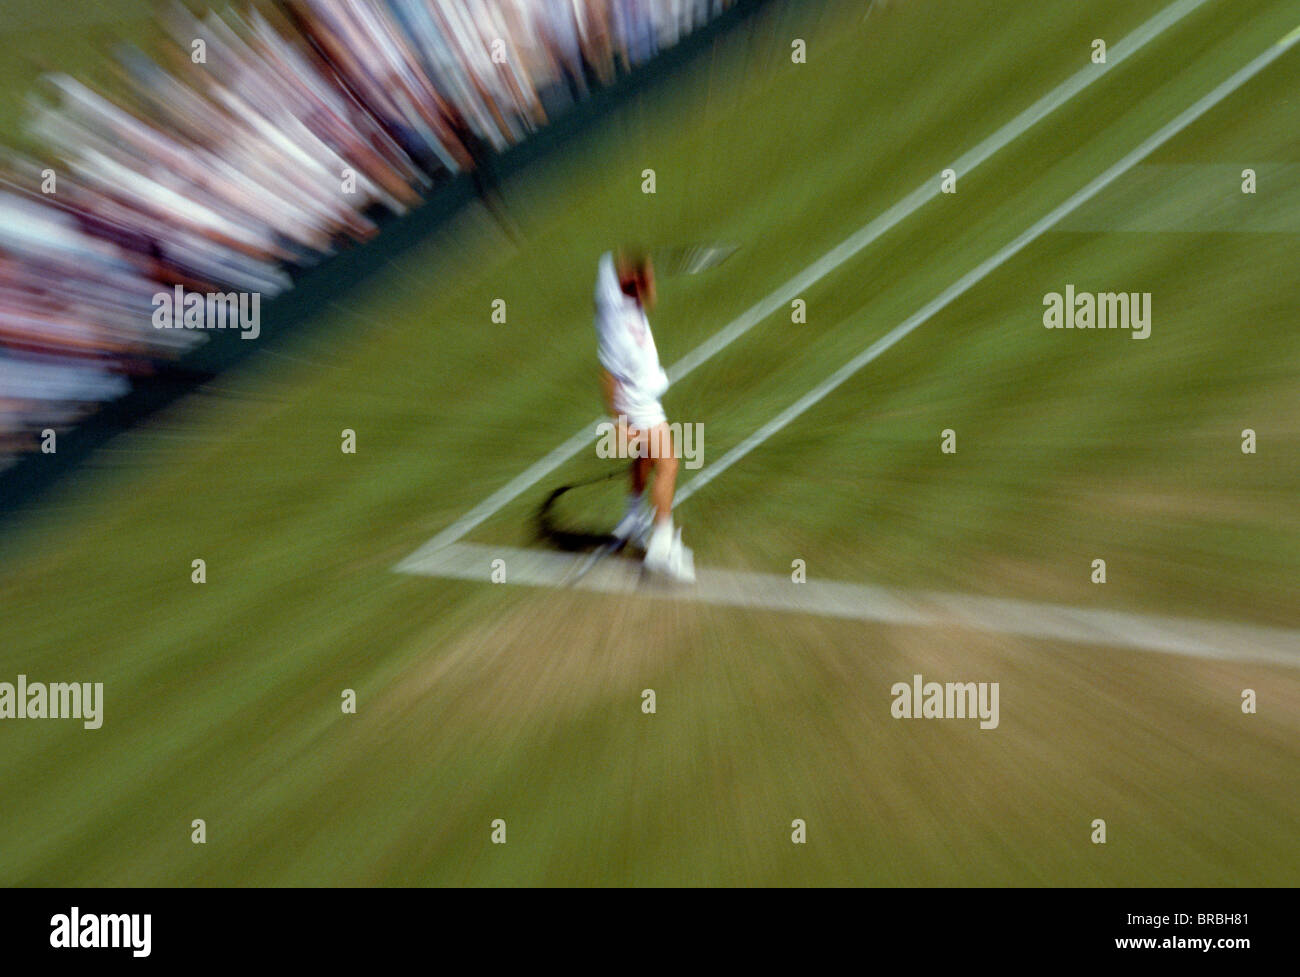 Blur action view of male tennis player returning serve Stock Photo